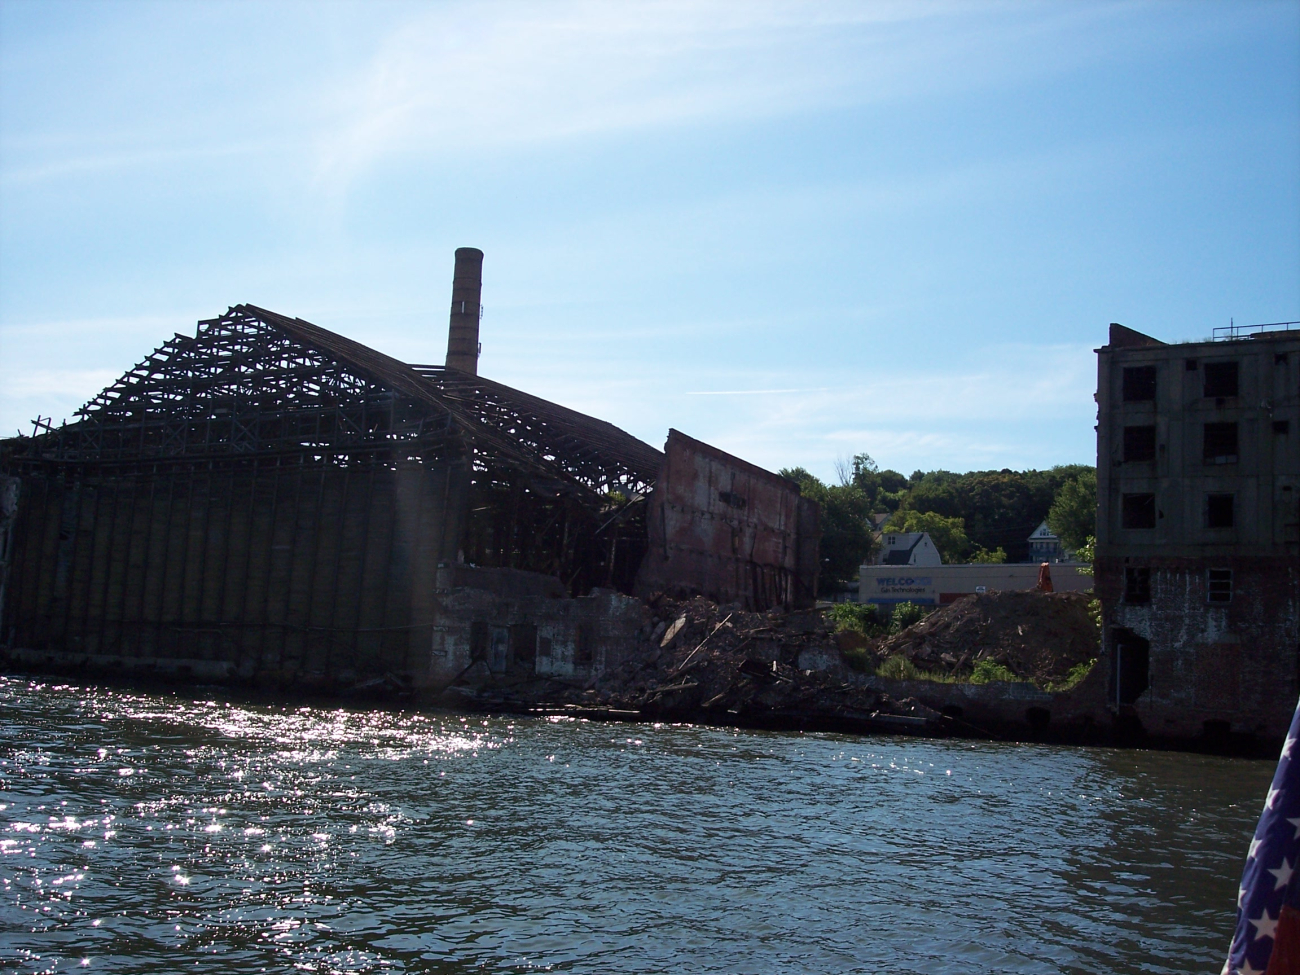 A crumbling industrial facility somewhere in the New York waterfront area